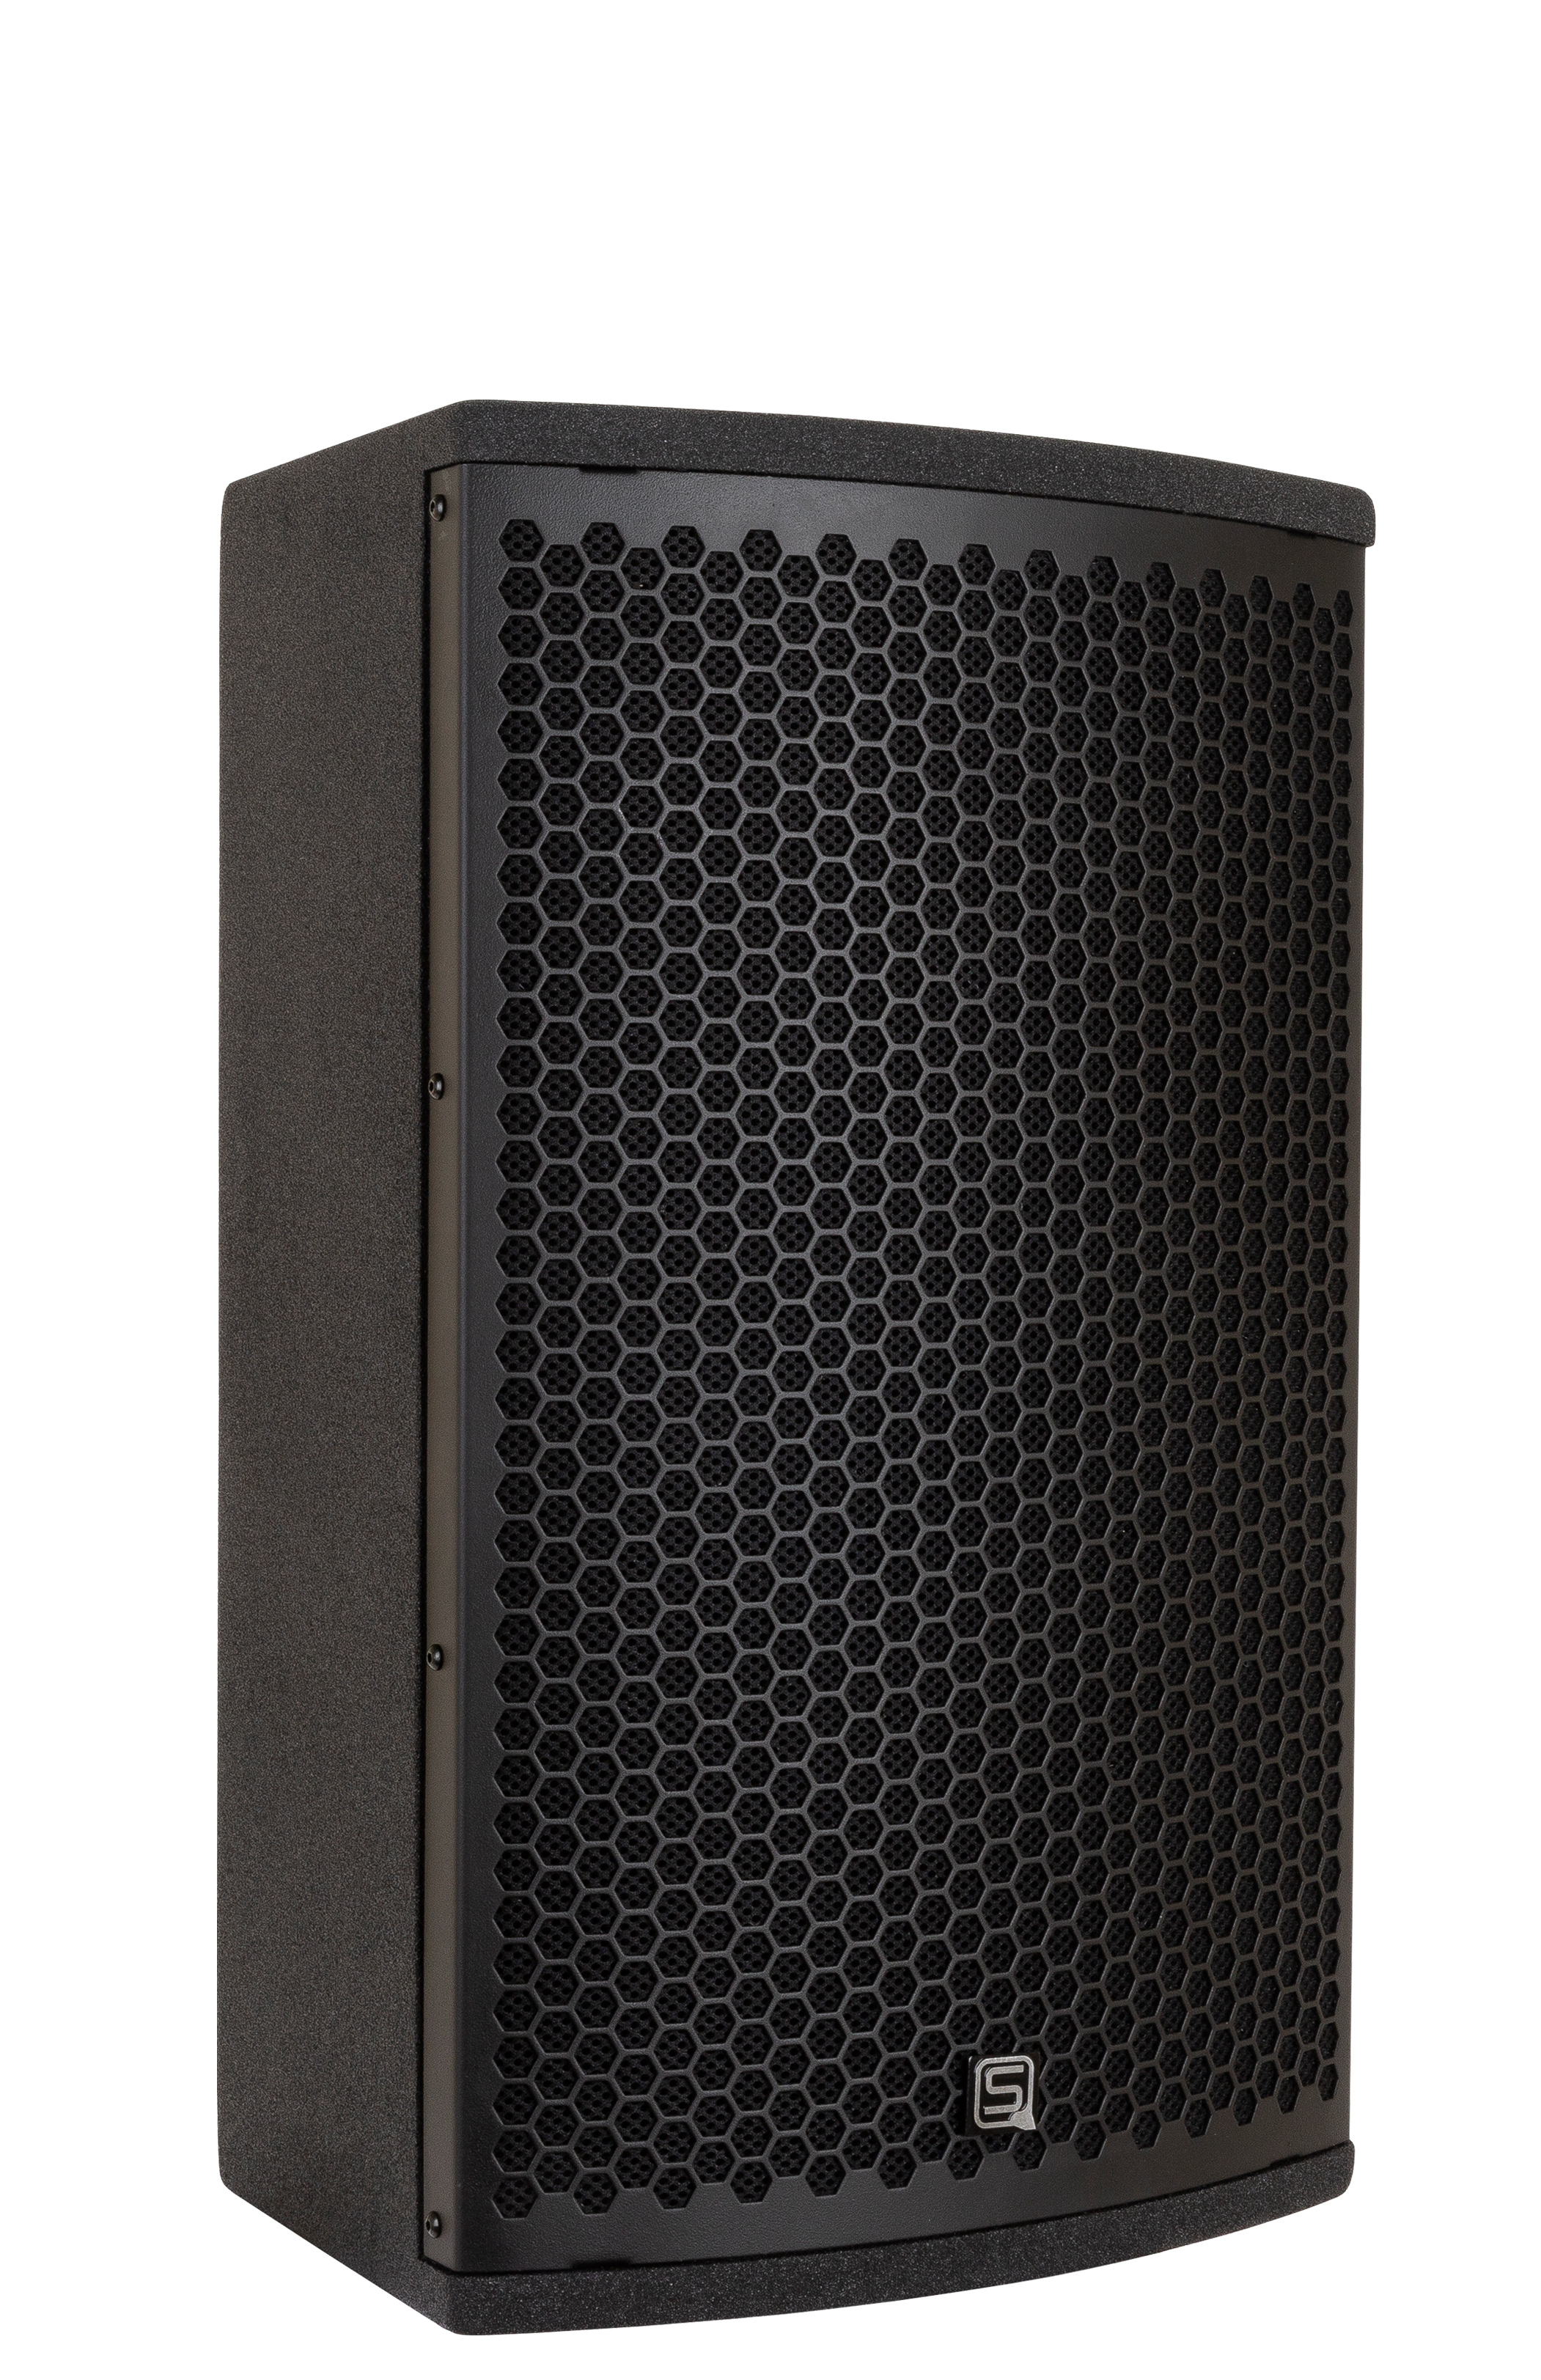 Premium class 10" DSP-processed active speaker cabinet for a wide range of professional applications